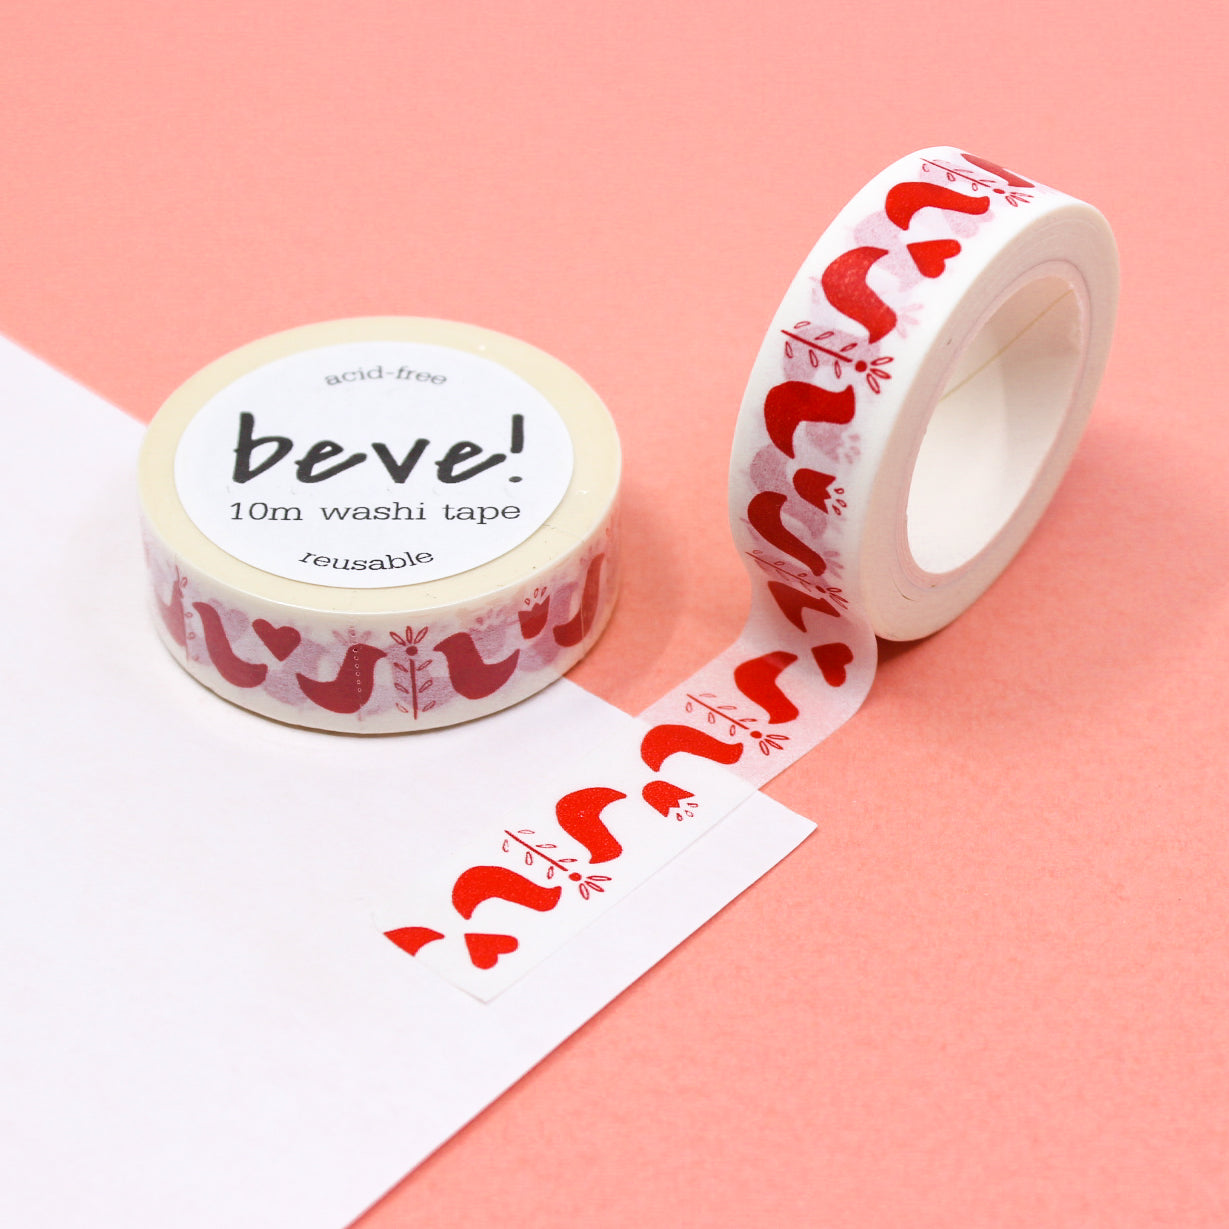 Enhance your crafts with our Red Modern Folk Bird Washi Tape, showcasing contemporary folk art-inspired bird motifs in a striking red hue. A creative addition to your projects. This tape is from Beve and sold at BBB Supplies Craft Shop.